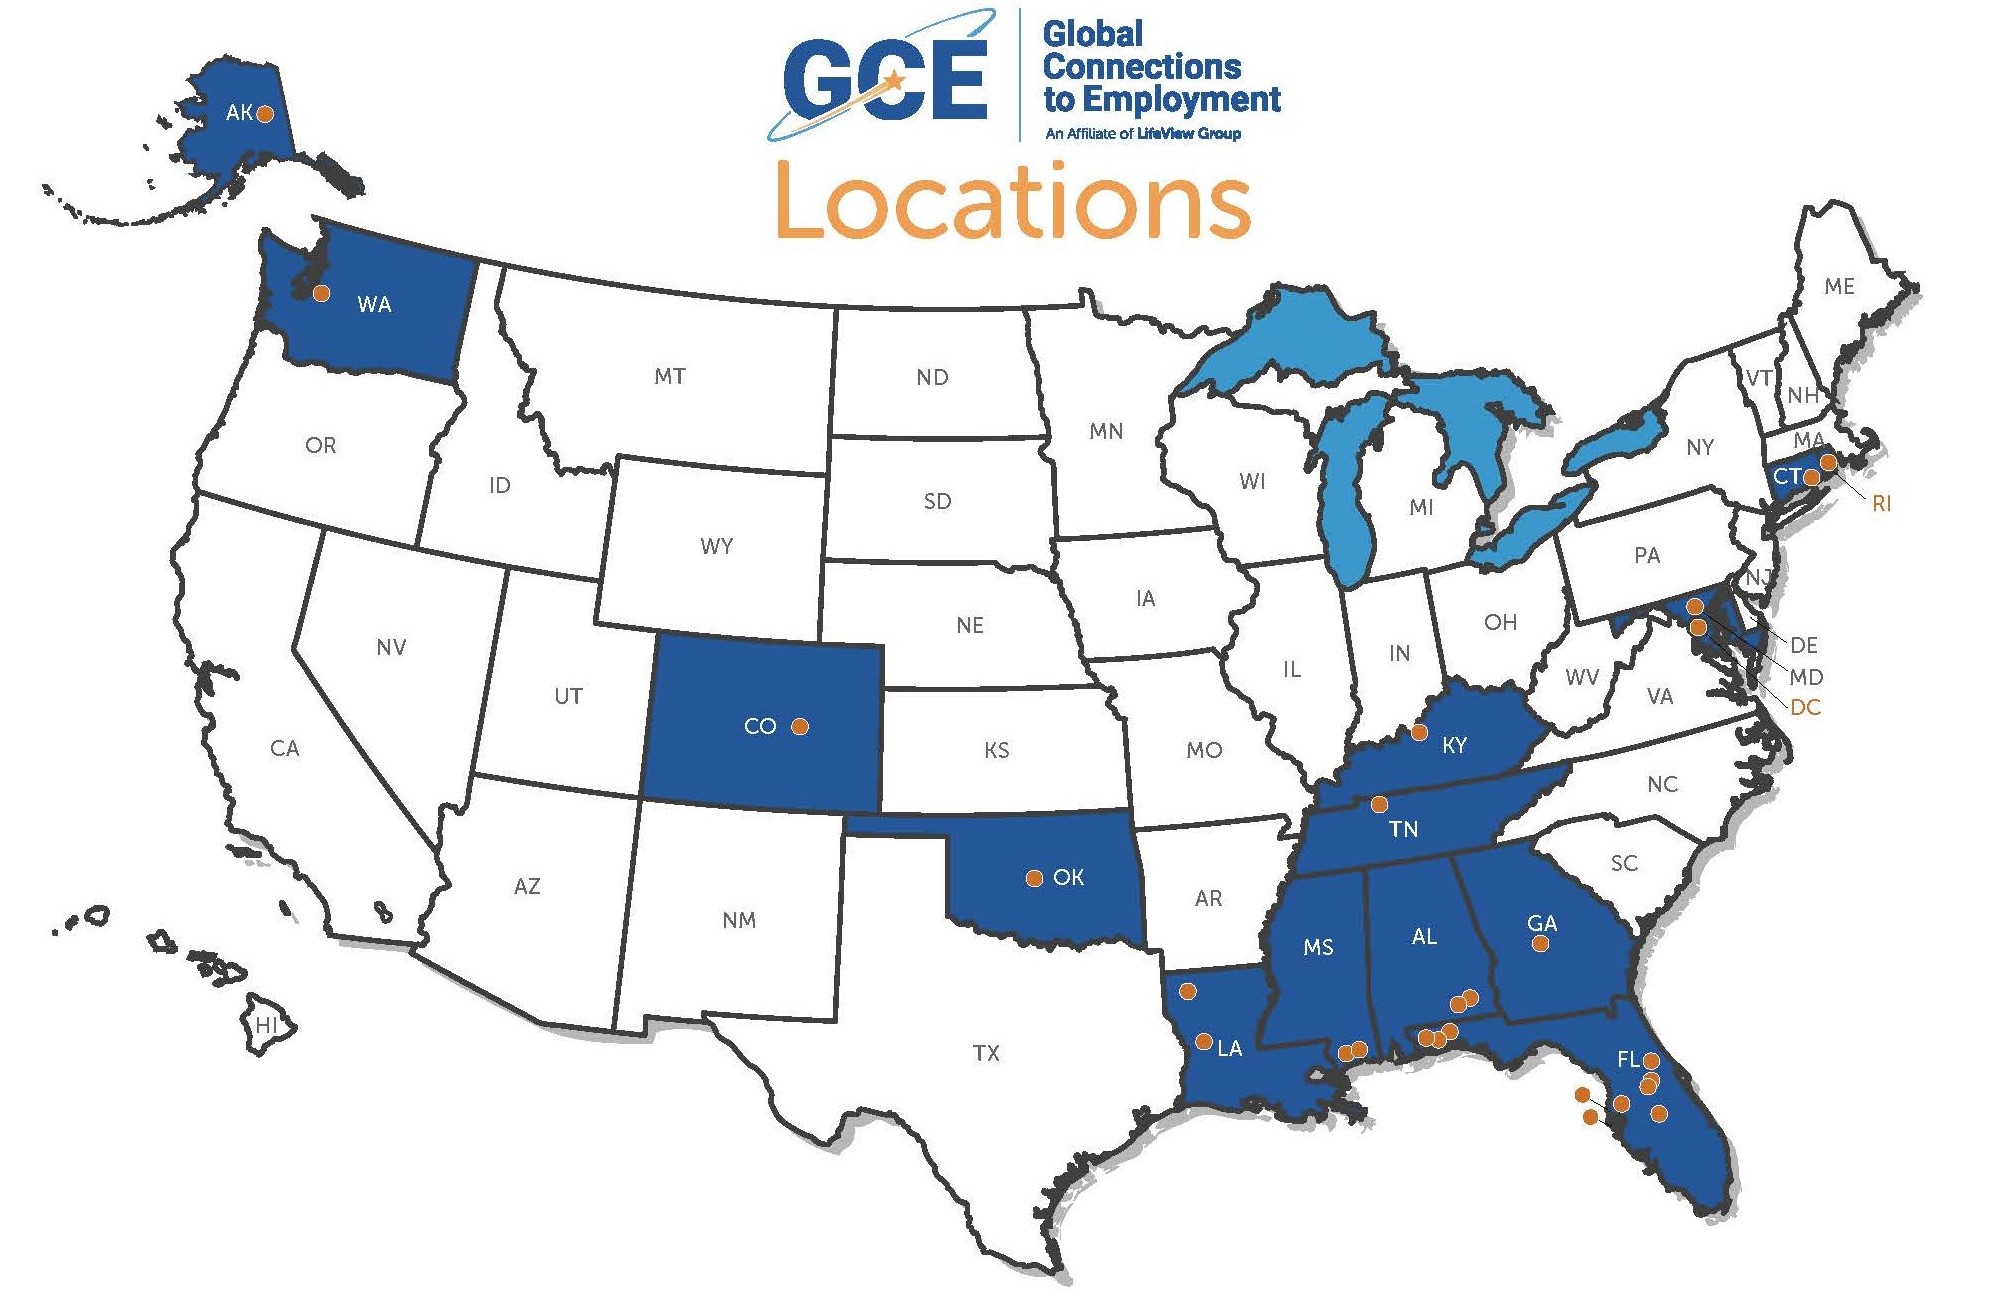 GCE locations map